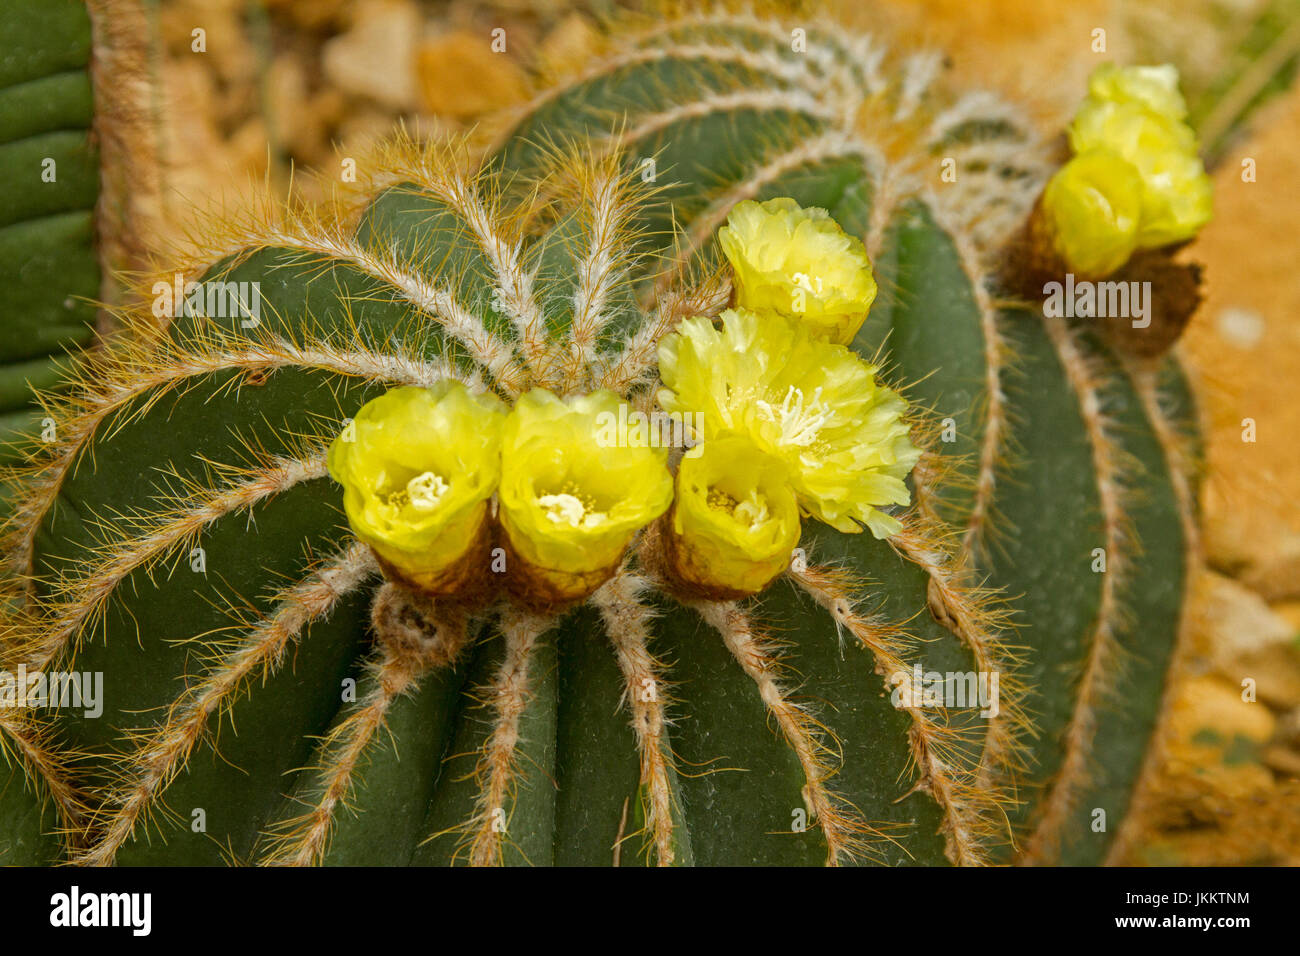 Notocactus magnificus with yellow green body, symmetrical rows of golden spines, and cluster of yellow flowers Stock Photo